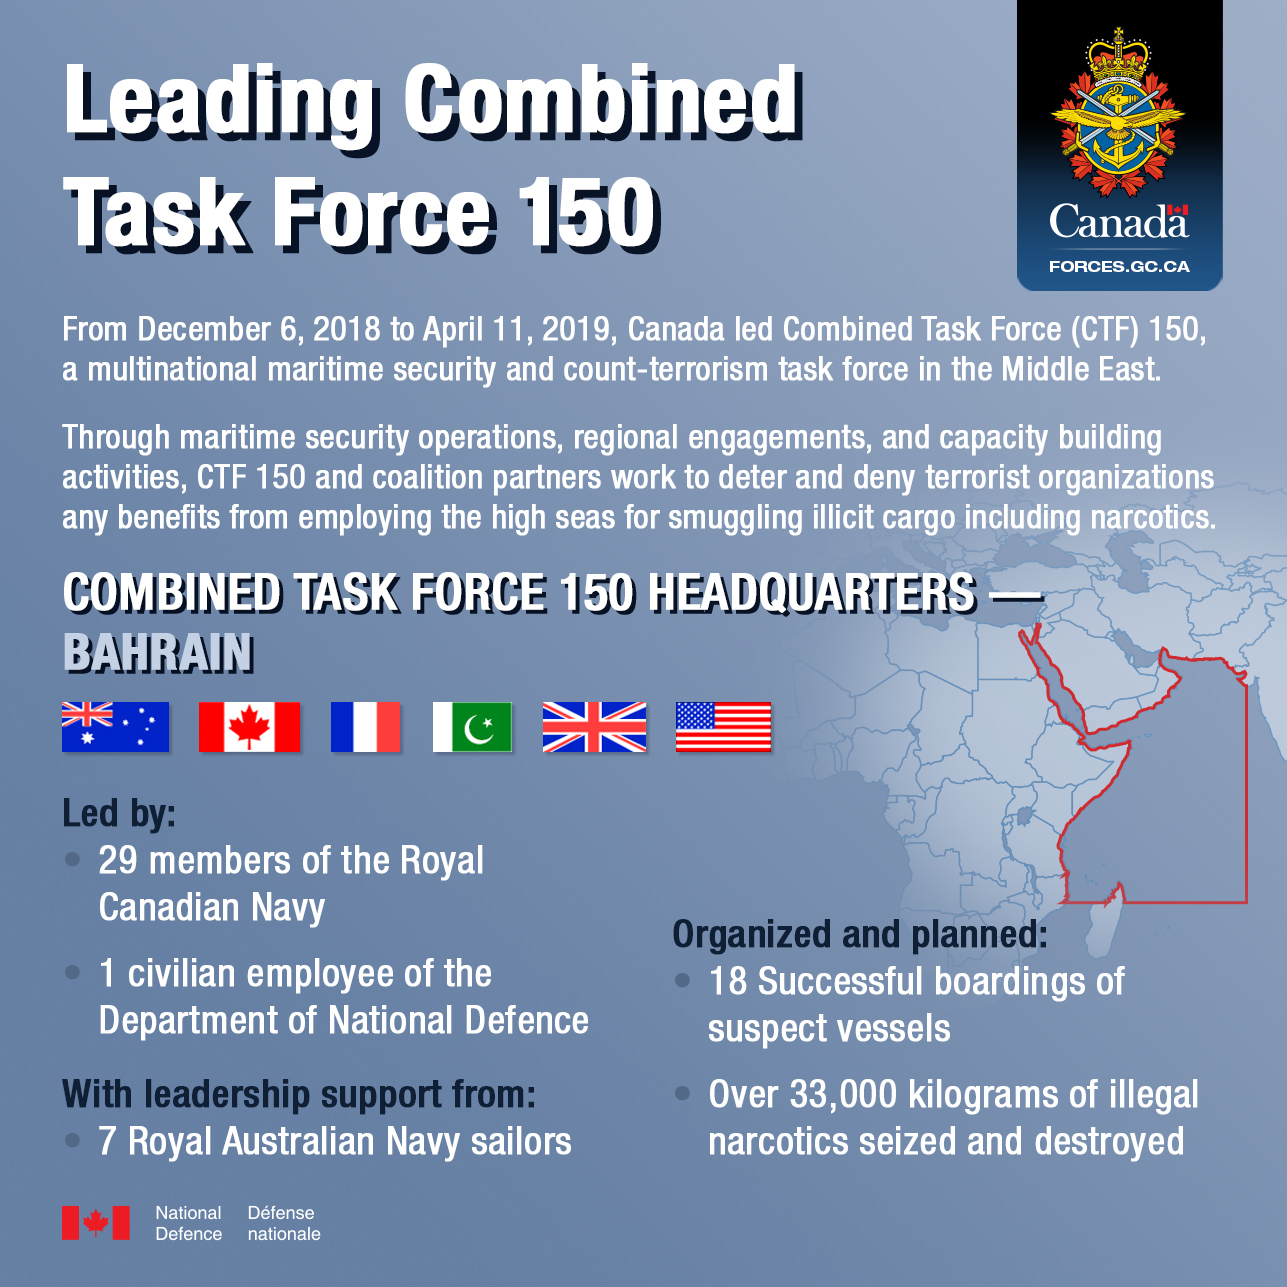 Infographic about Operation ARTEMIS. Leading Combined Task Force 150. From December 6, 2018 to April 11, 2019, Canada led Combined Task Force (CTF) 150, a multinational maritime security and count-terrorism task force in the Middle East. Through maritime security operations, regional engagements, and capacity building activities, CTF 150 and coalition partners work to deter and deny terrorist organizations any benefits from employing the high seas for smuggling illicit cargo including narcotics. Combined Task Force 150 Headquarters – Bahrain. Led by: 29 members of the Royal Canadian Navy, 1 civilian employee of the Department of National Defence. With leadership support from: 7 Royal Australian Navy sailors. Organized and planned: 18 successful boardings of suspect vessels, over 33,000 kilograms of illegal narcotics seized and destroyed.